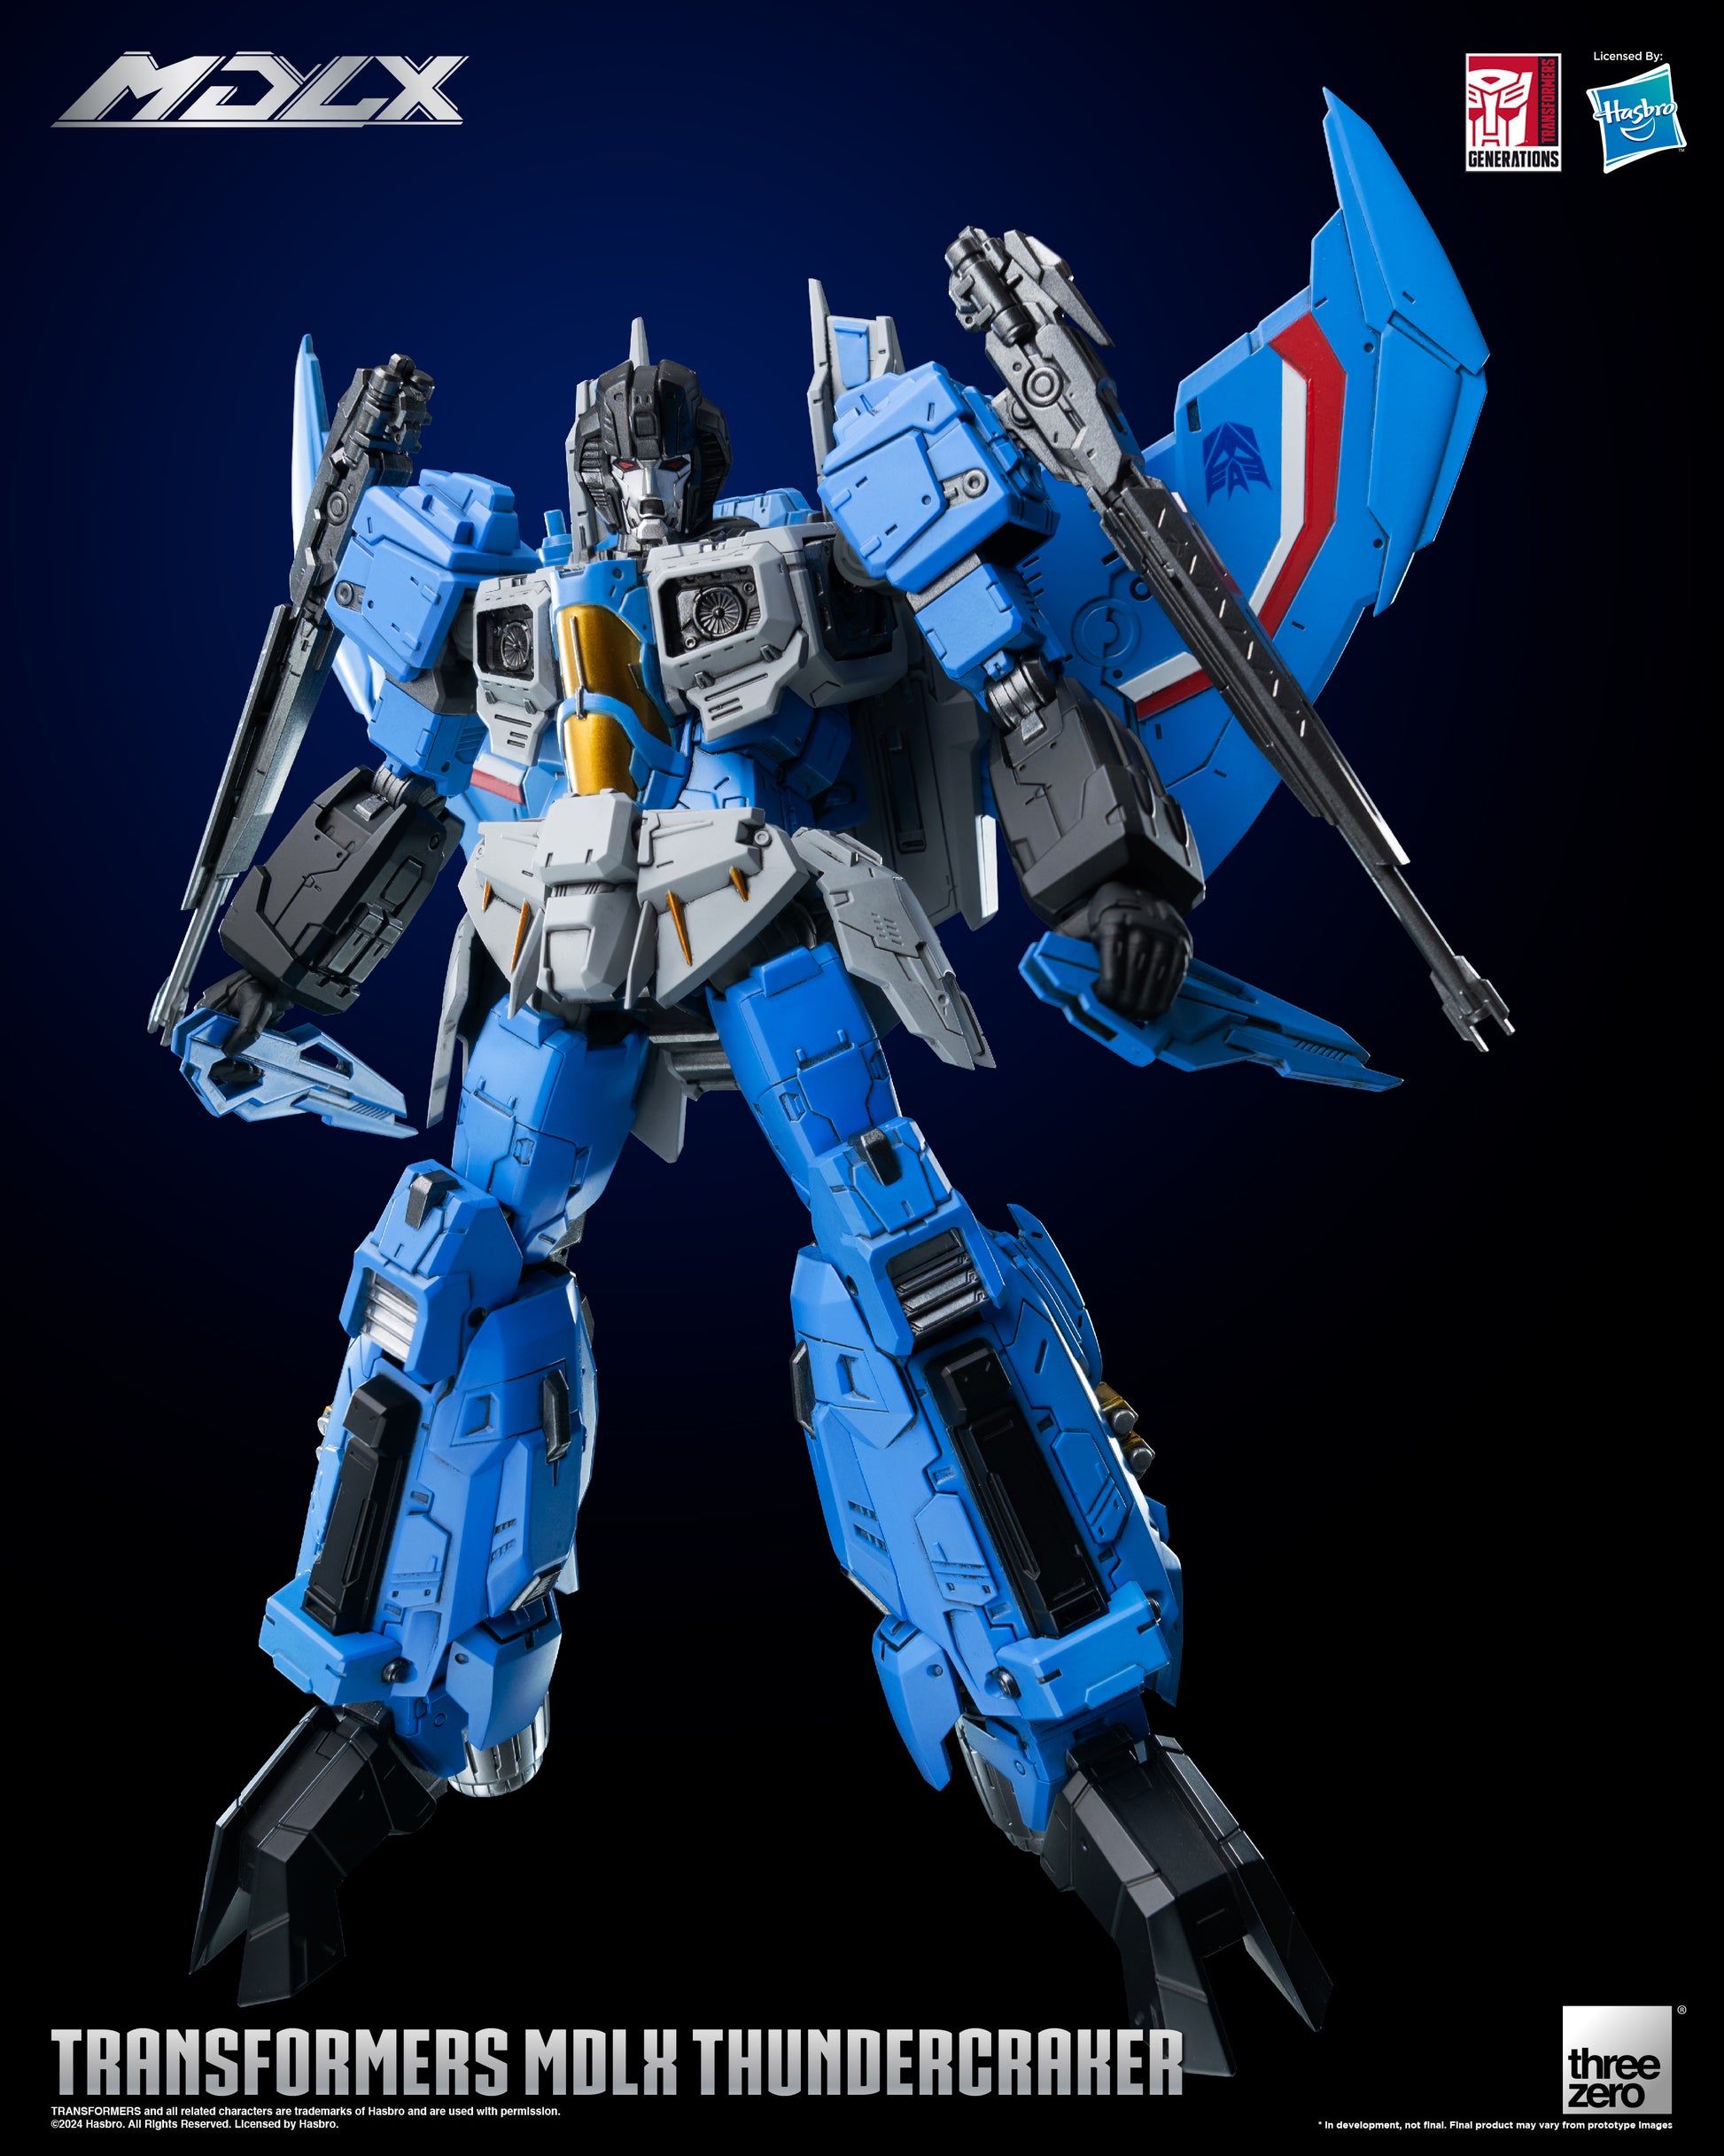 Transformers MDLX Articulated Figure Series Thundercracker standing with 2 hand weapons